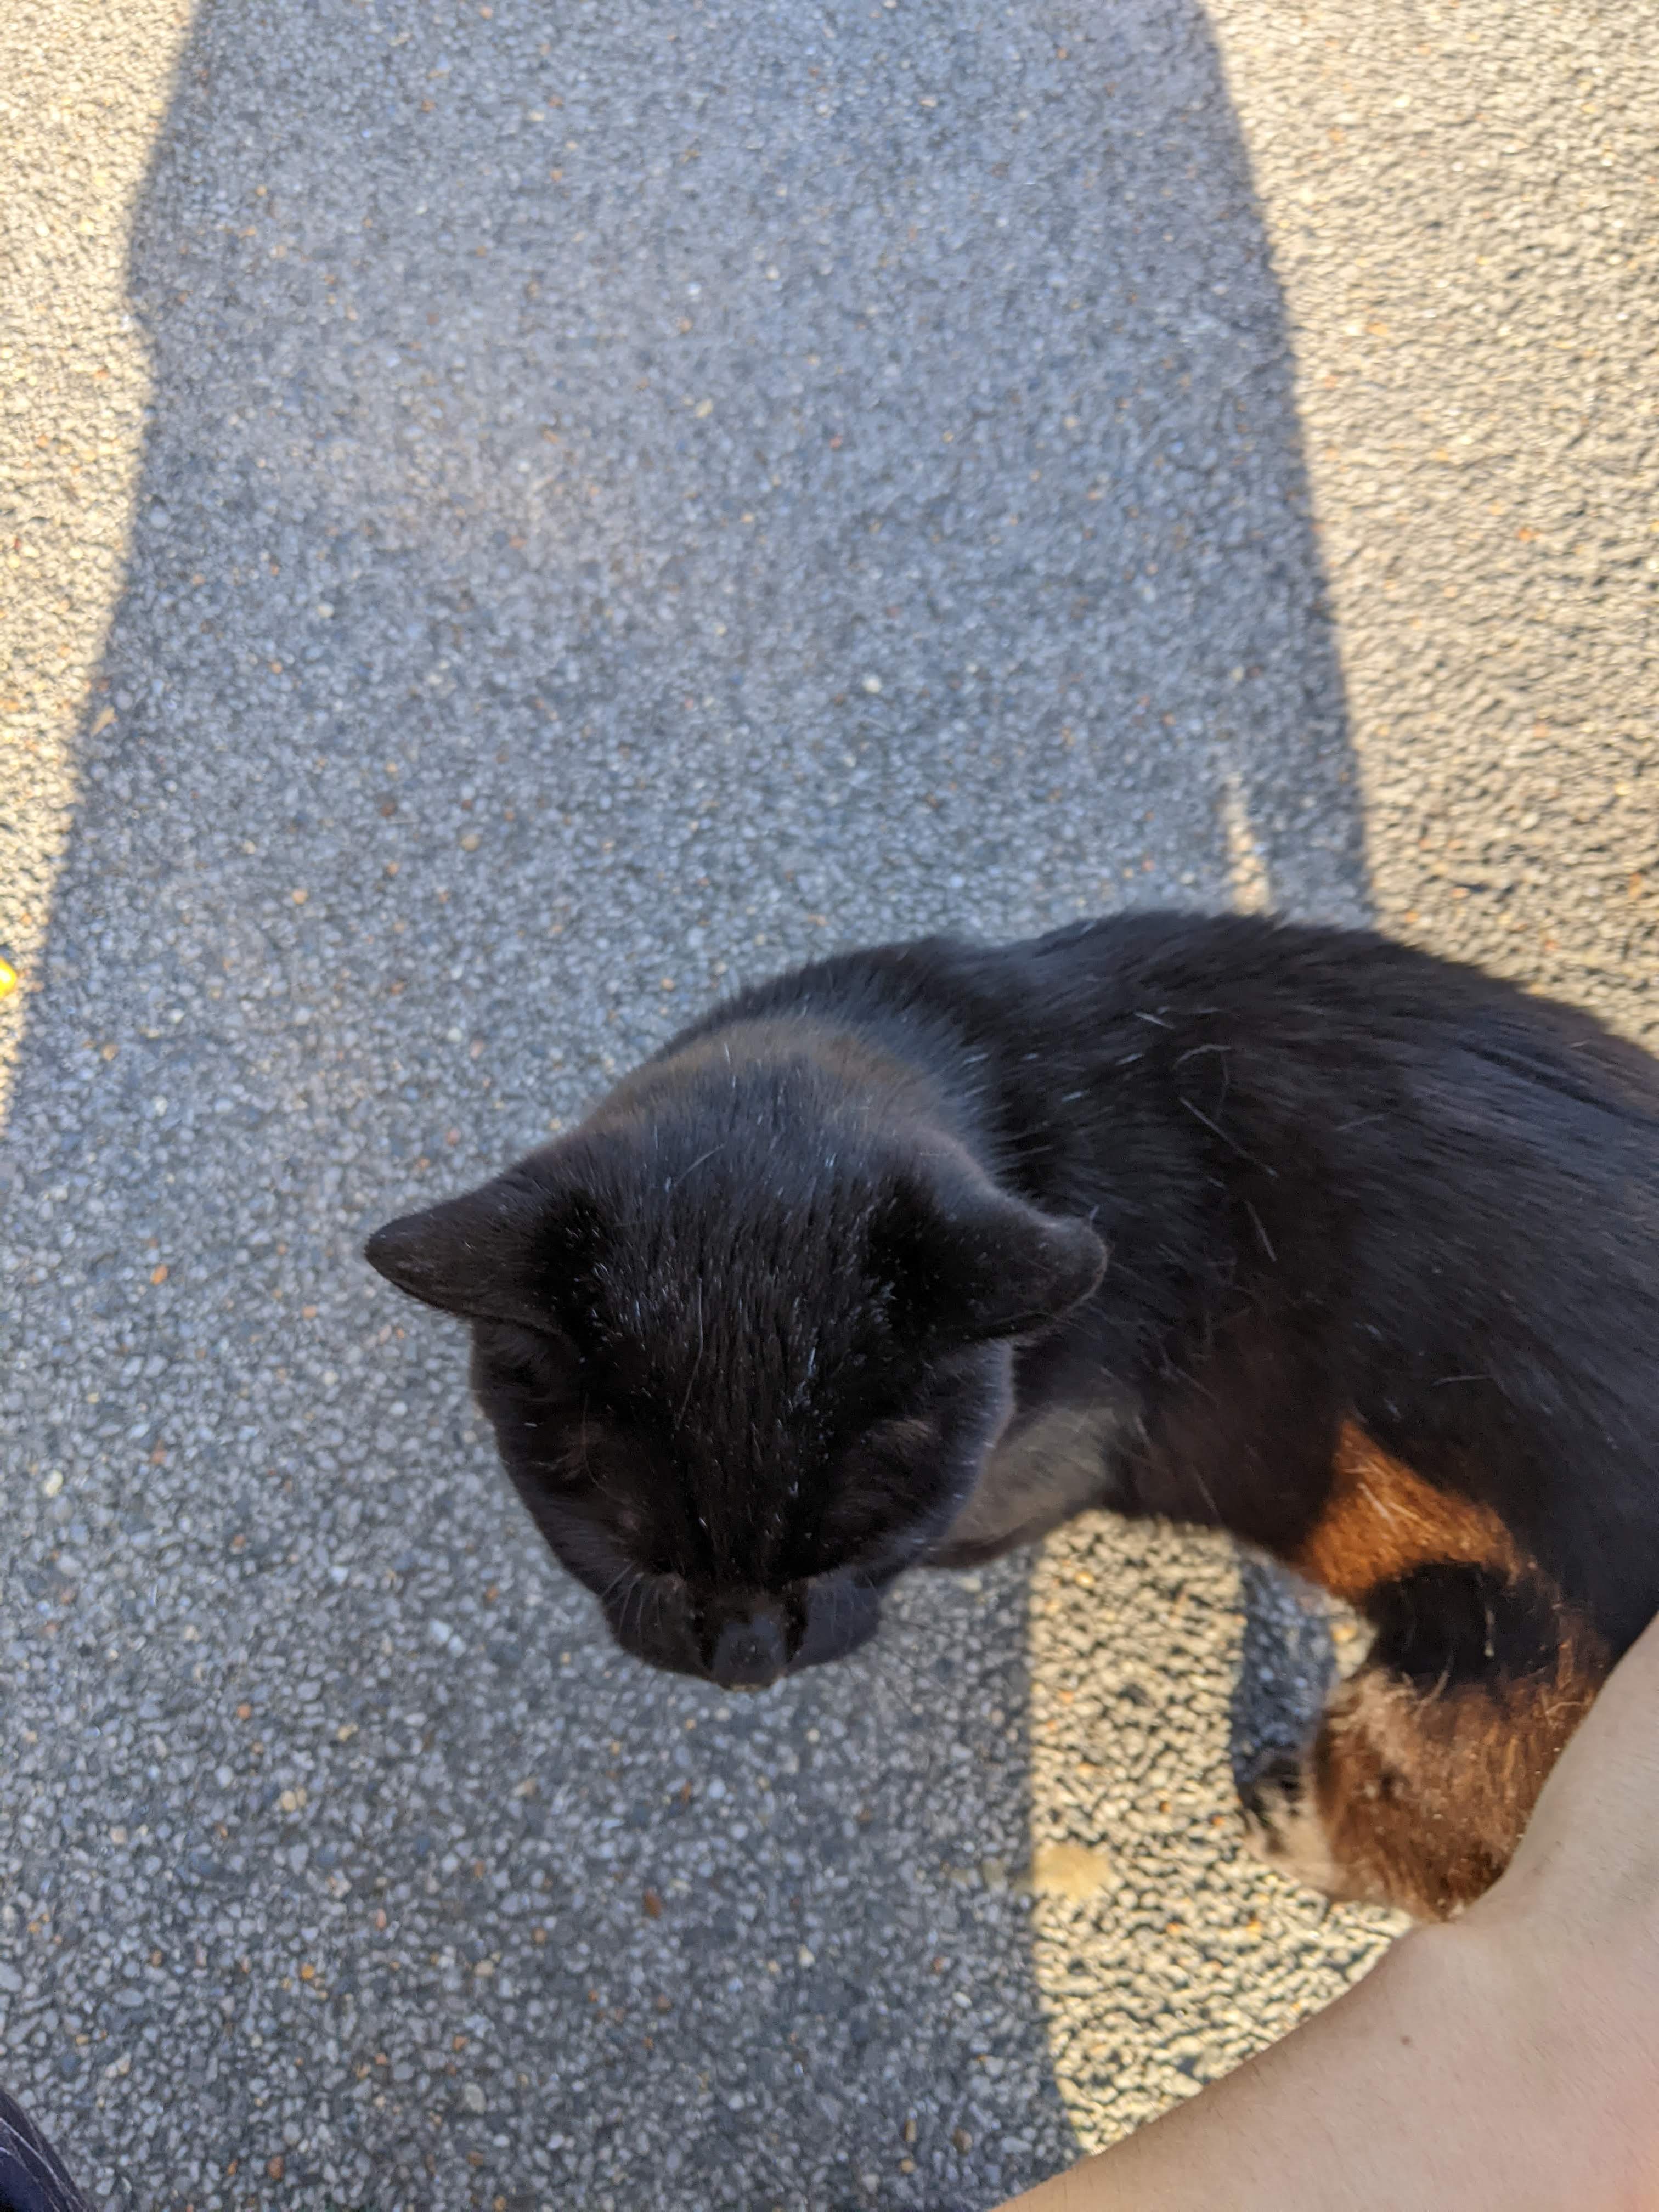 pic of cat on the pavement